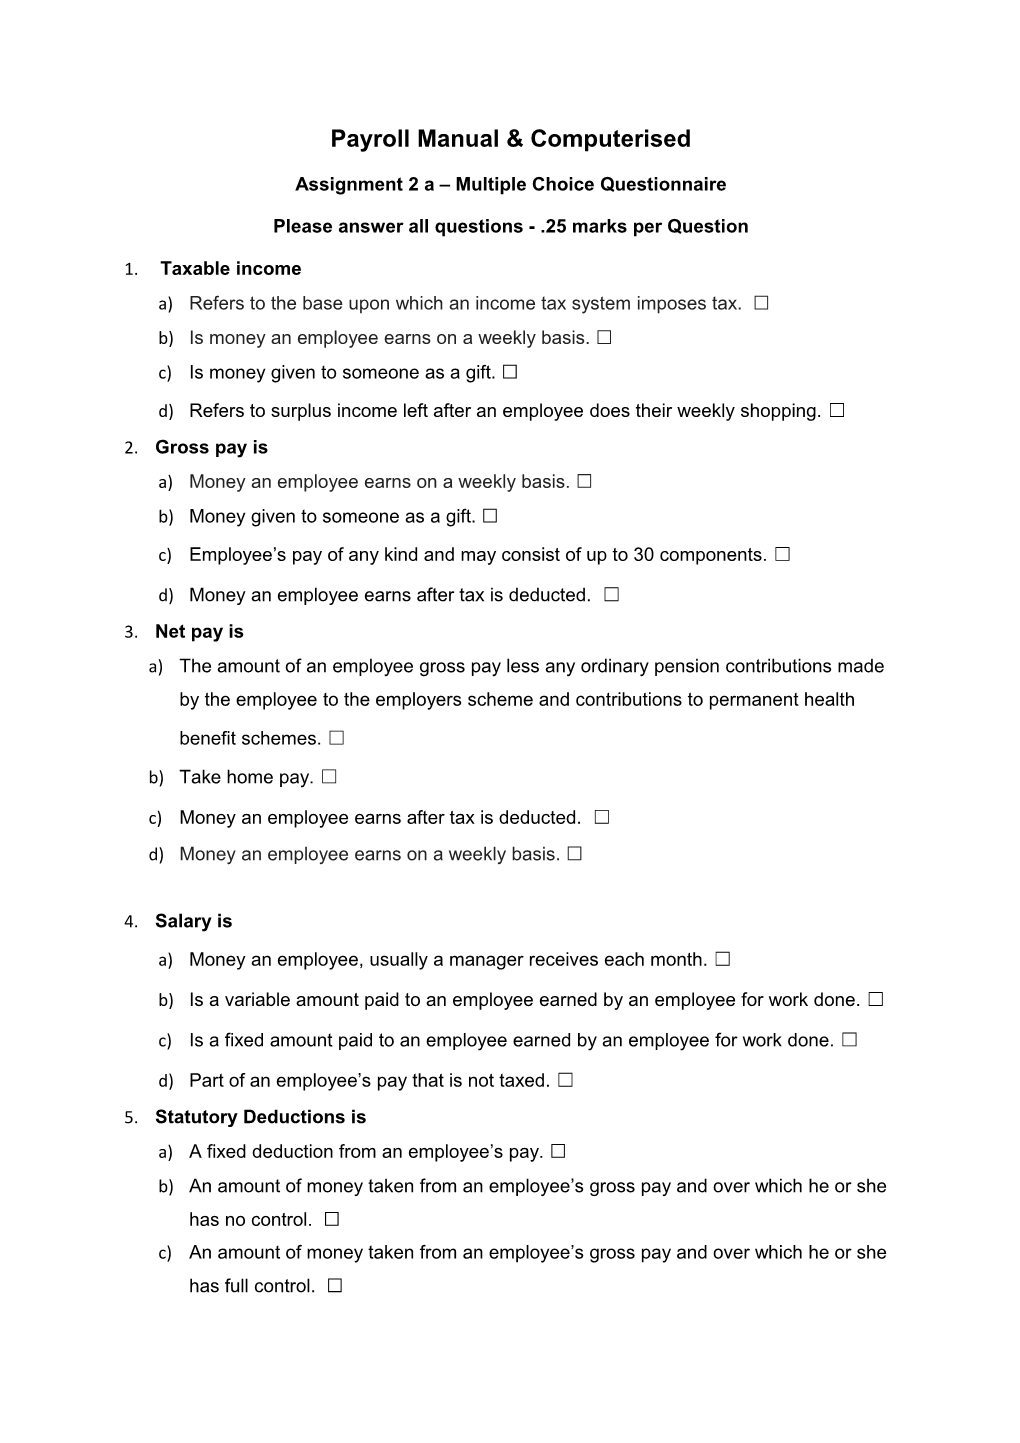 Assignment 2 a Multiple Choice Questionnaire